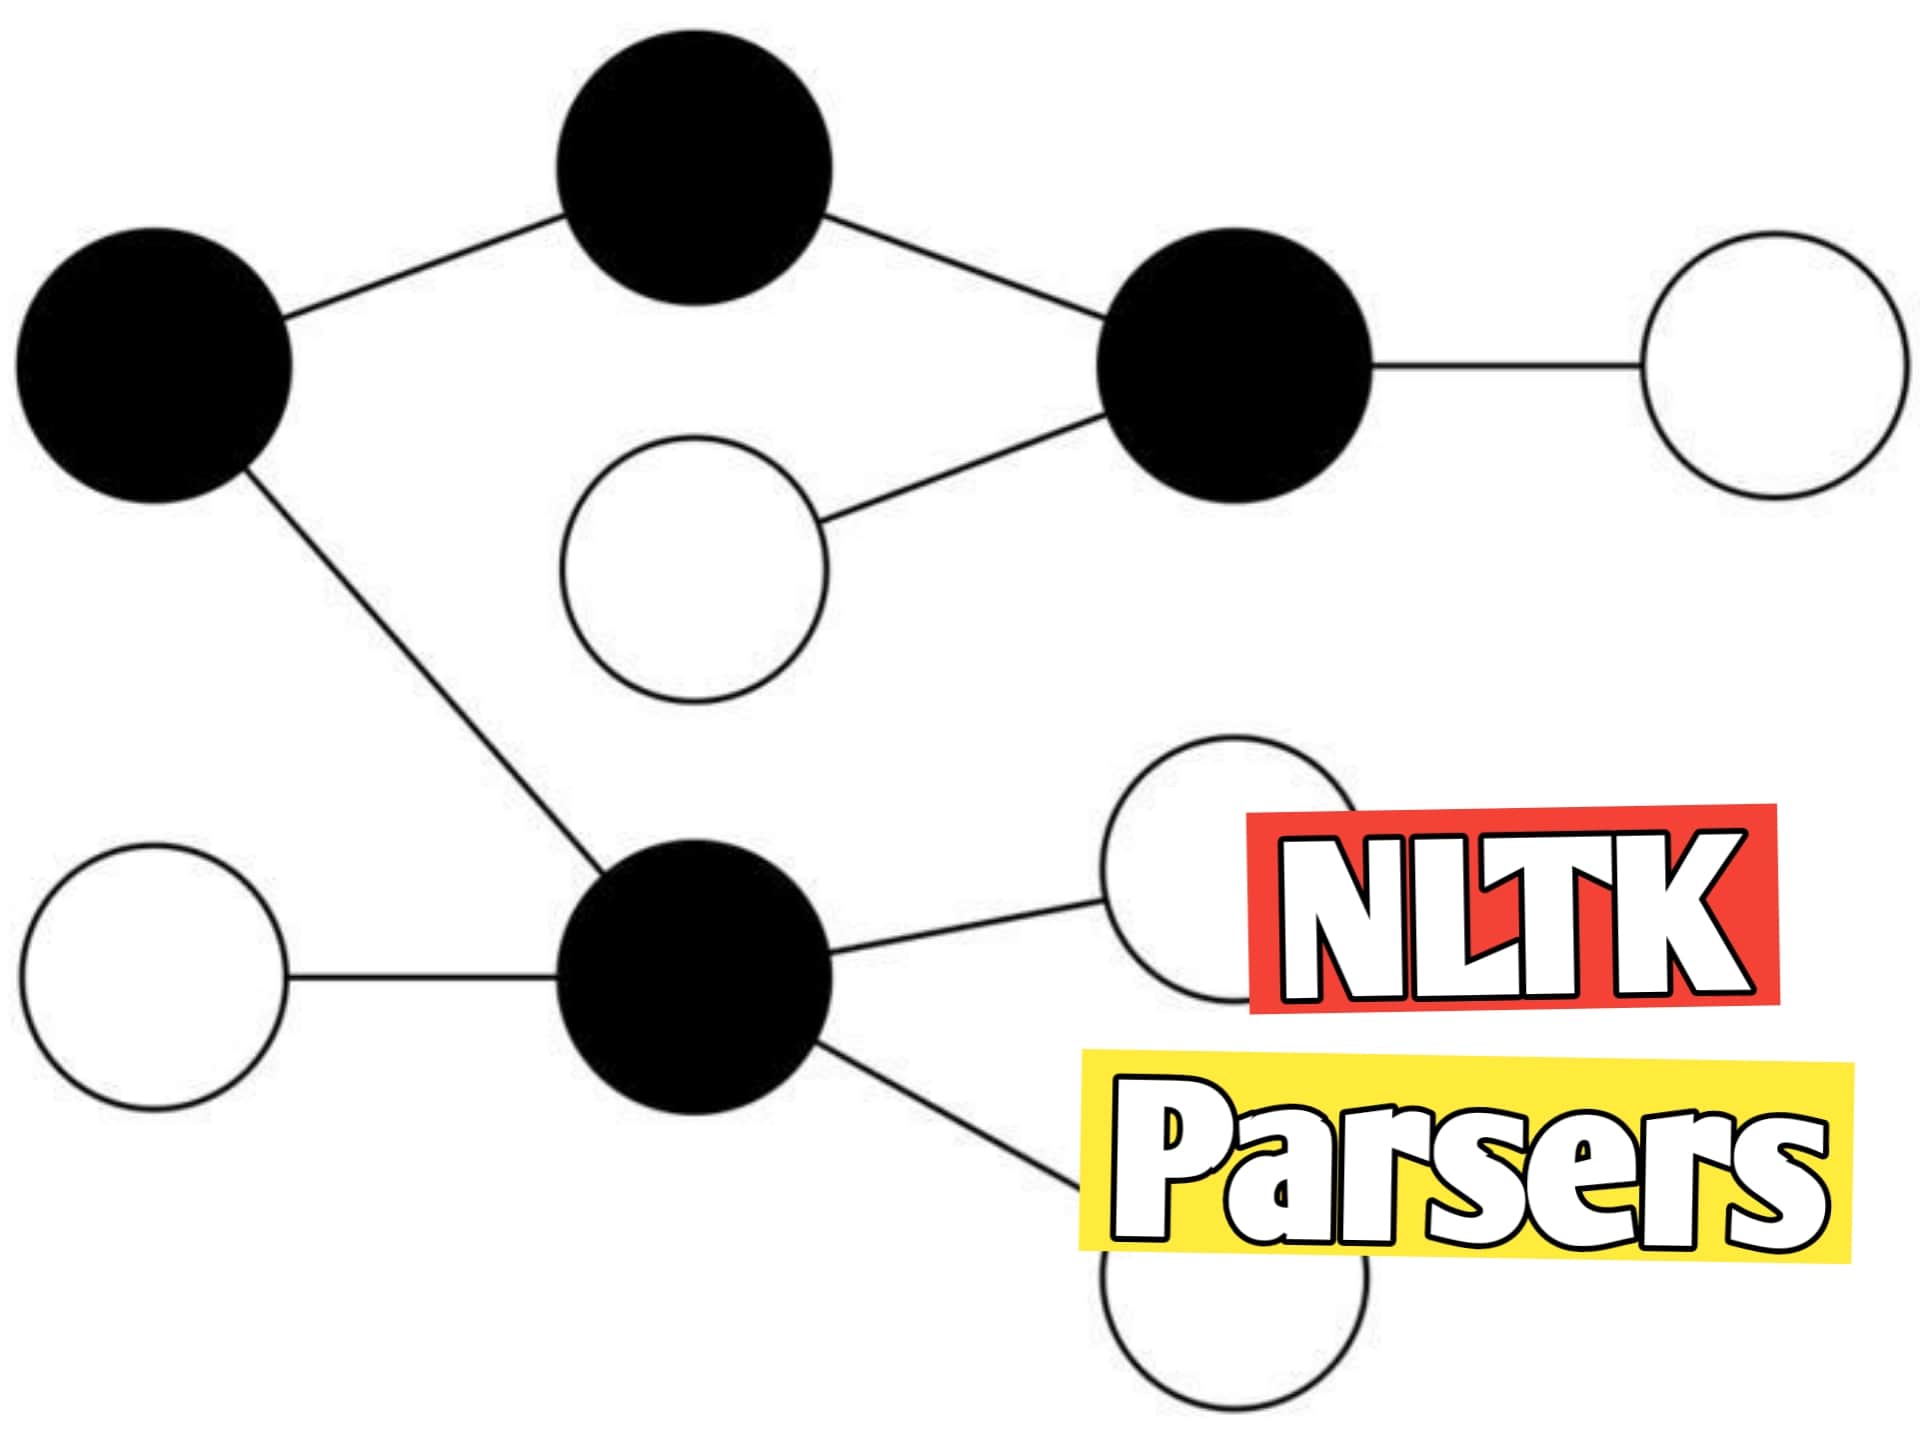 Comparing the Efficiency of Parsers in NLTK